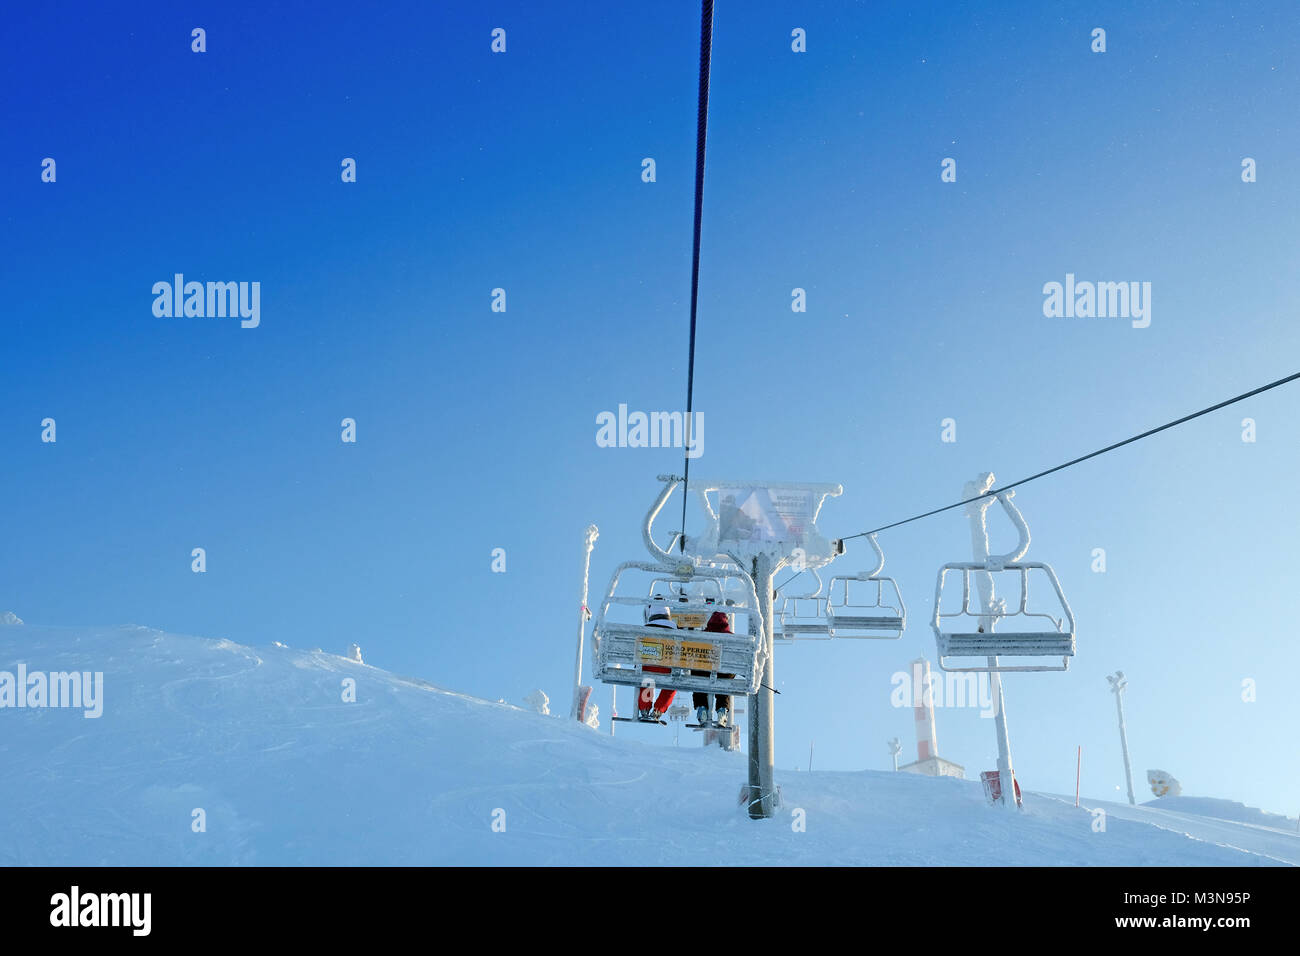 Skiers on a Chairlift at The ski resort of Ruka in Finland Stock Photo